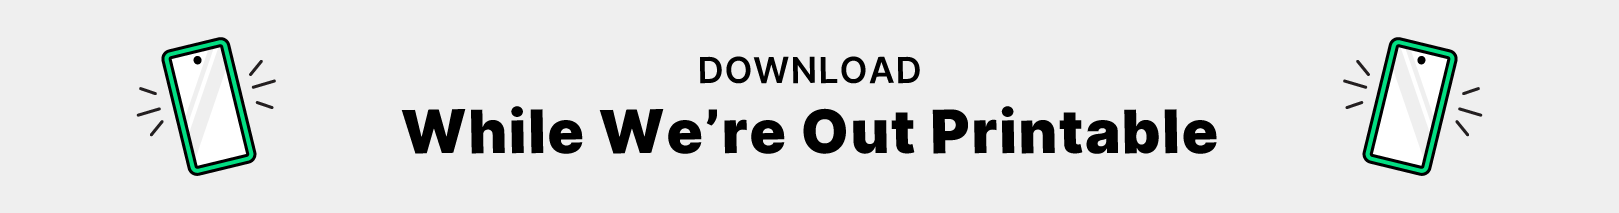 Download the while we're out printable.